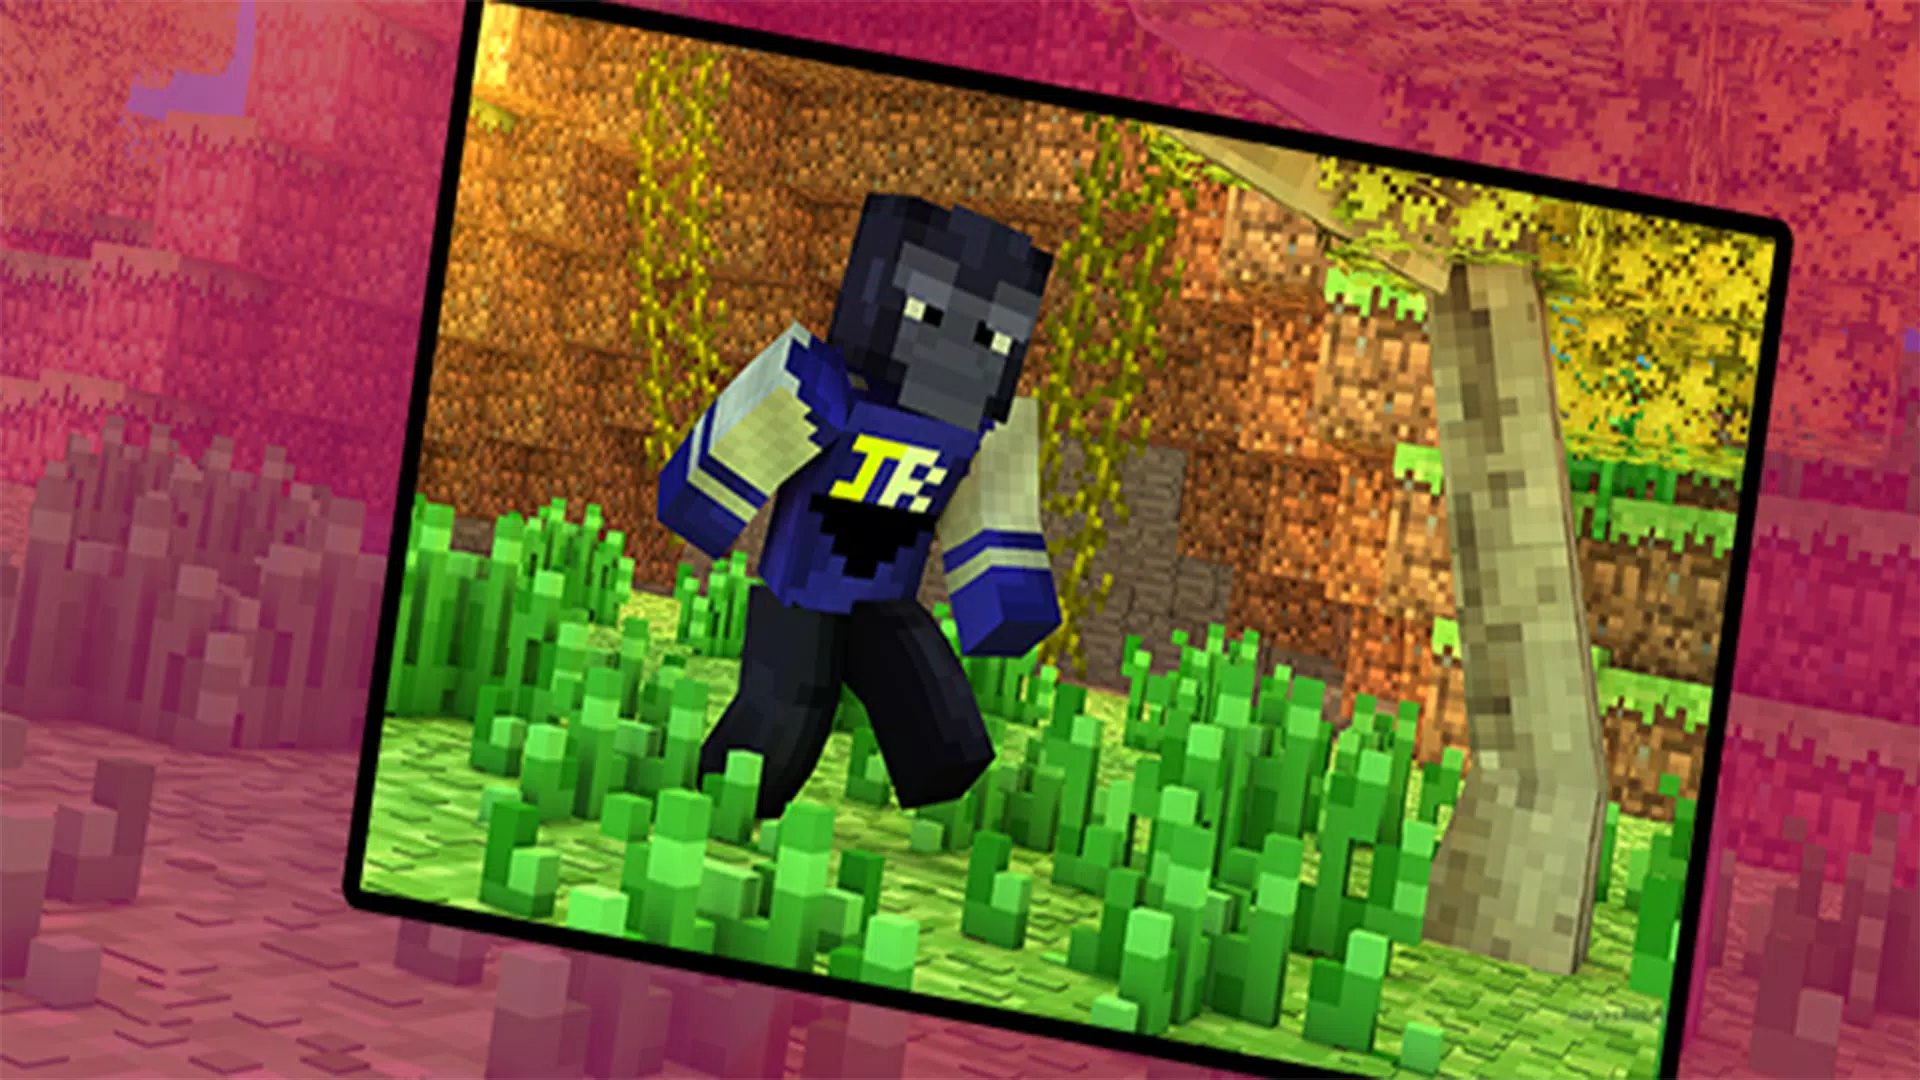 Gorilla Tag Skin for Minecraft for Android - Free App Download